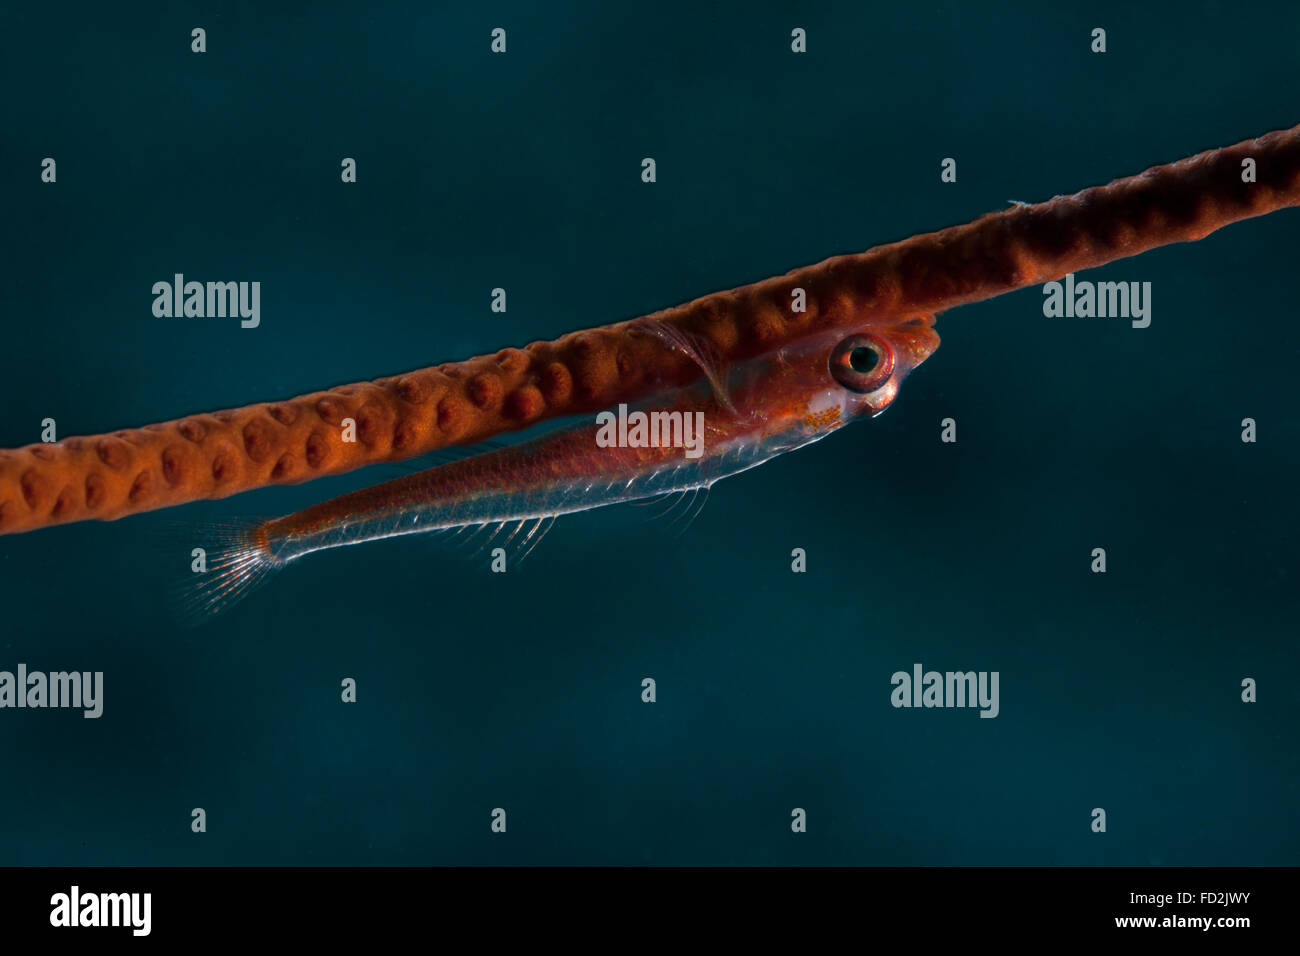 Whip coral goby, Fiji. Stock Photo